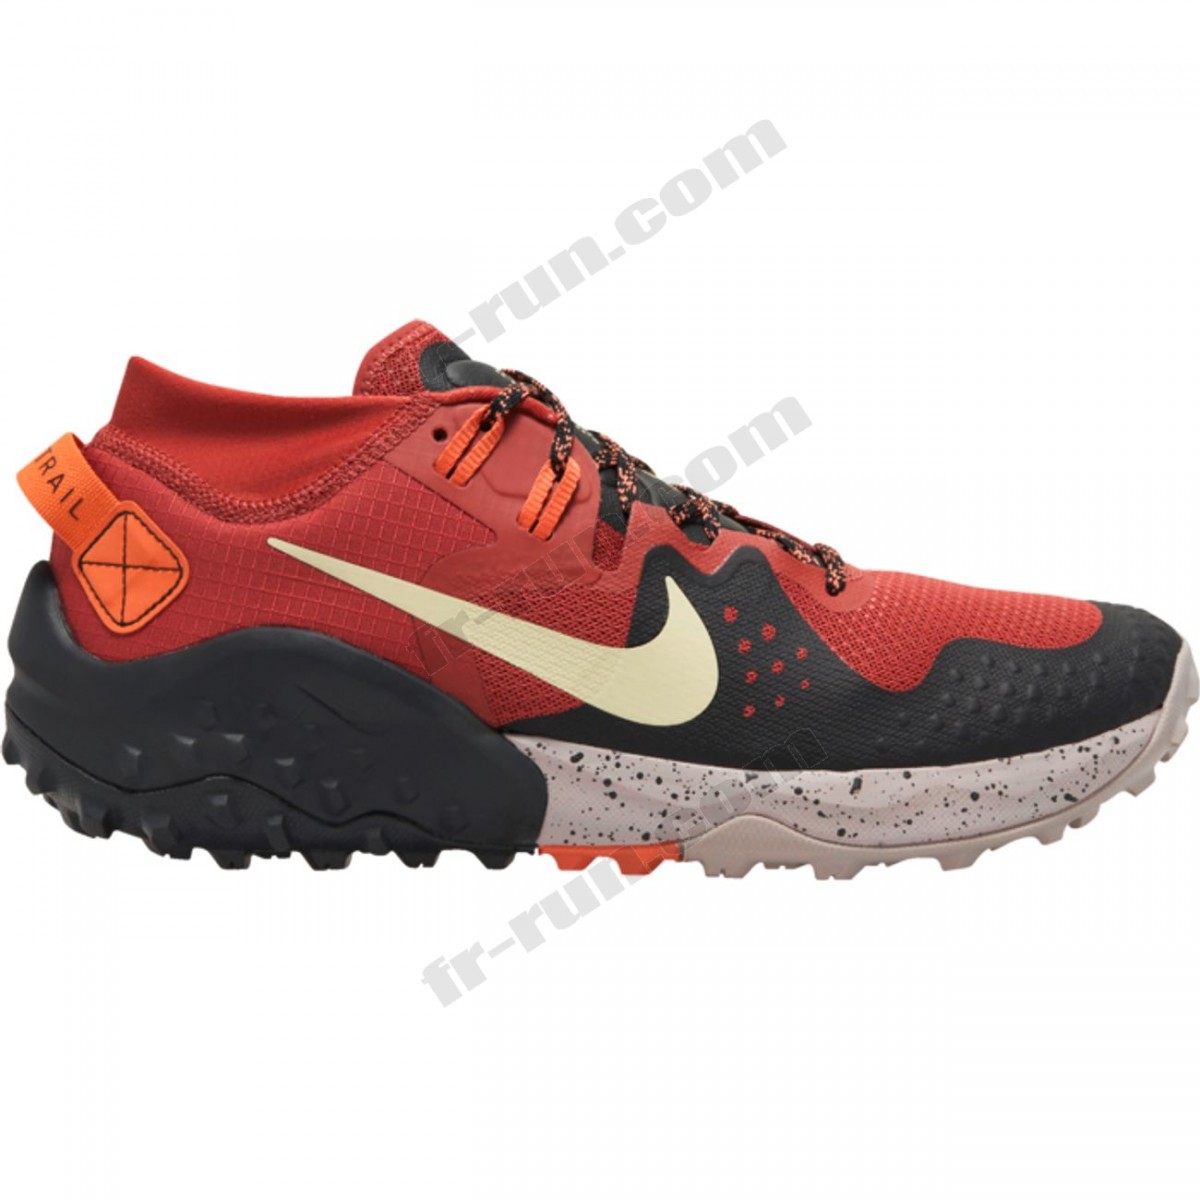 Nike/CHAUSSURES BASSES running homme NIKE NIKE WILDHORSE 6 ◇◇◇ Pas Cher Du Tout - Nike/CHAUSSURES BASSES running homme NIKE NIKE WILDHORSE 6 ◇◇◇ Pas Cher Du Tout